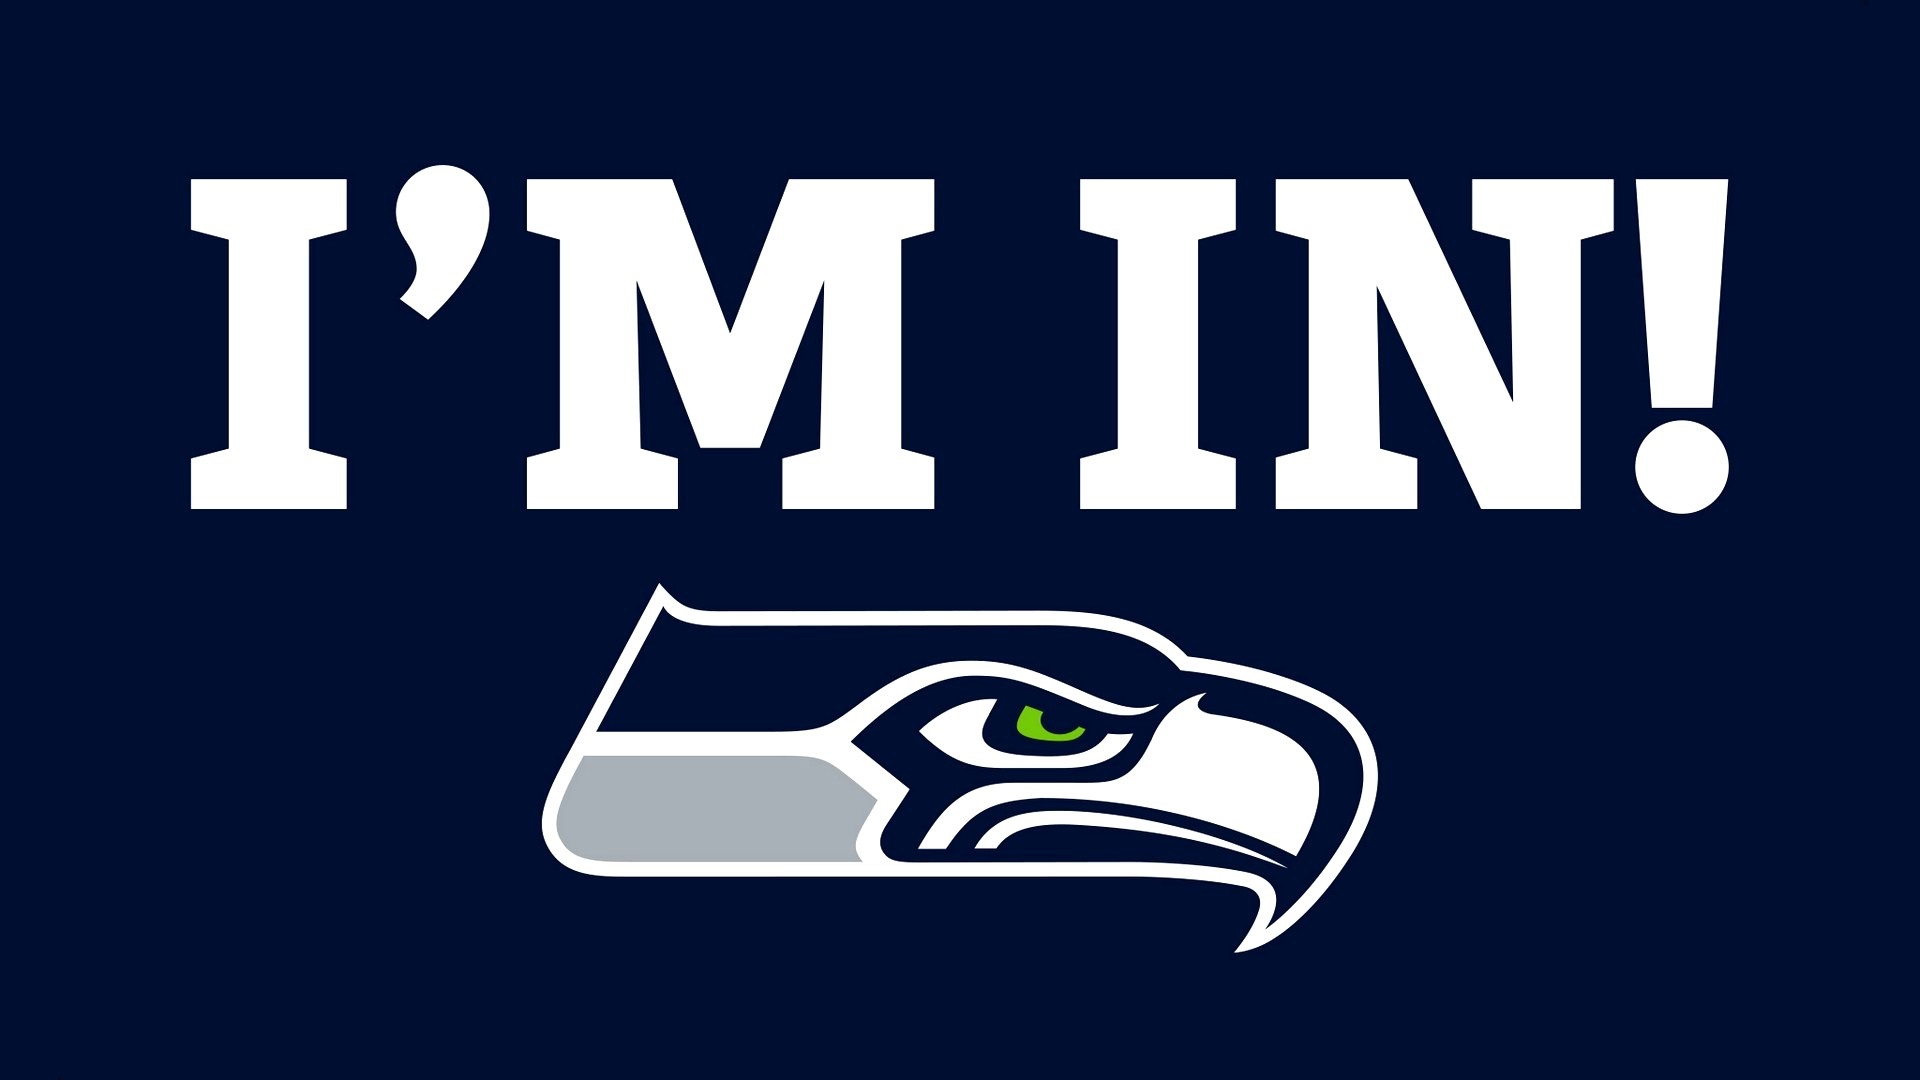 HD Desktop Wallpaper Seattle Seahawks Logo With high-resolution 1920X1080 pixel. You can use this wallpaper for your Mac or Windows Desktop Background, iPhone, Android or Tablet and another Smartphone device